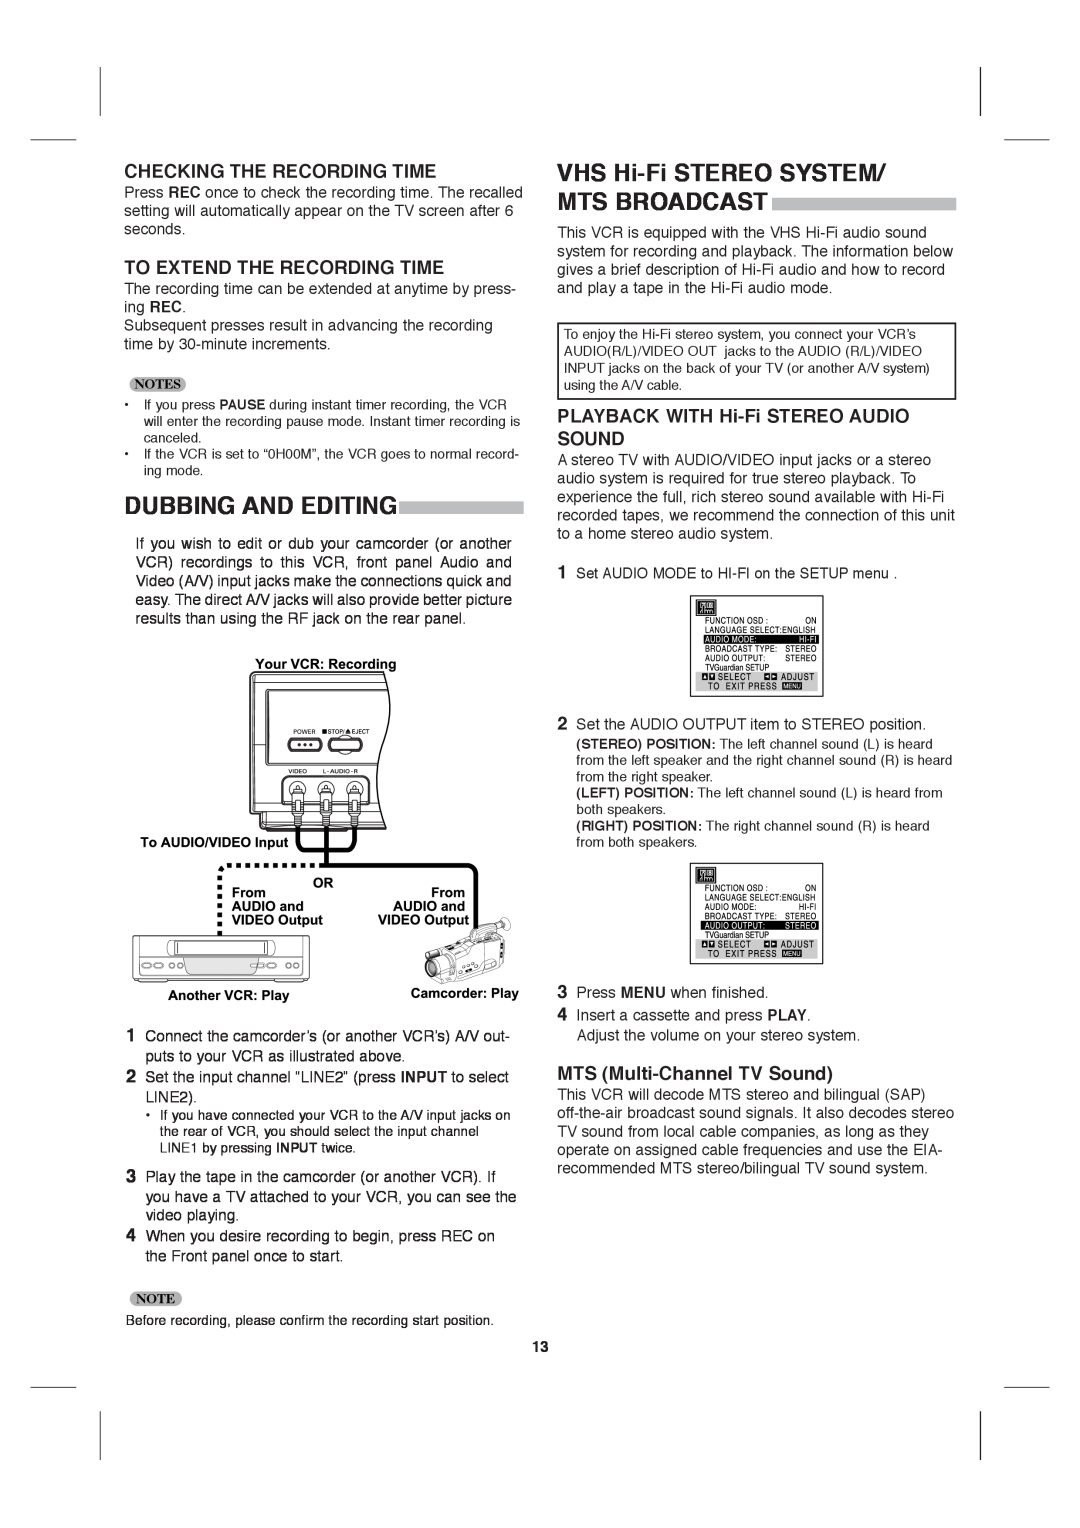 Sanyo VWM-900 instruction manual Dubbing And Editing, Checking The Recording Time, To Extend The Recording Time 